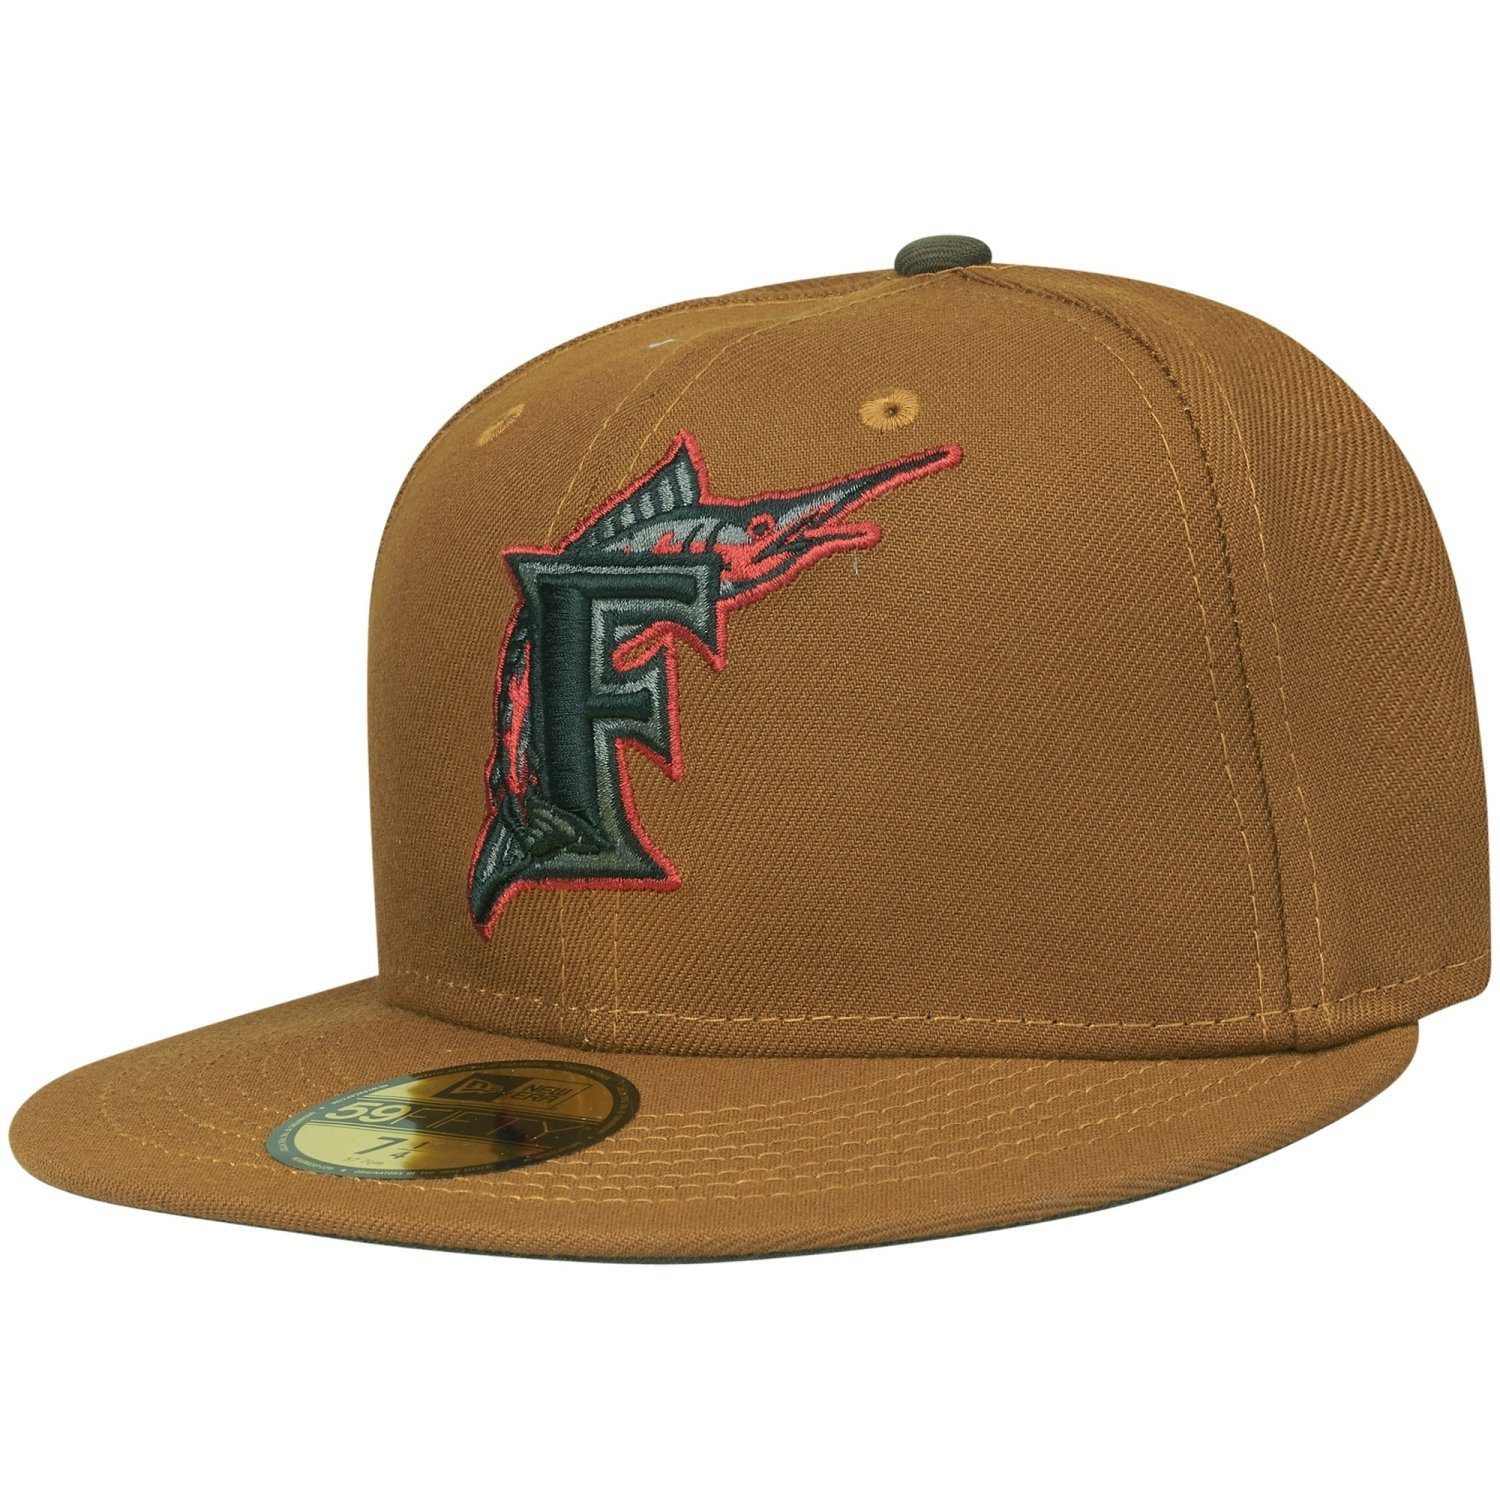 Cap Fitted SERIES 2003 WORLD Florida New Era 59Fifty Marlins